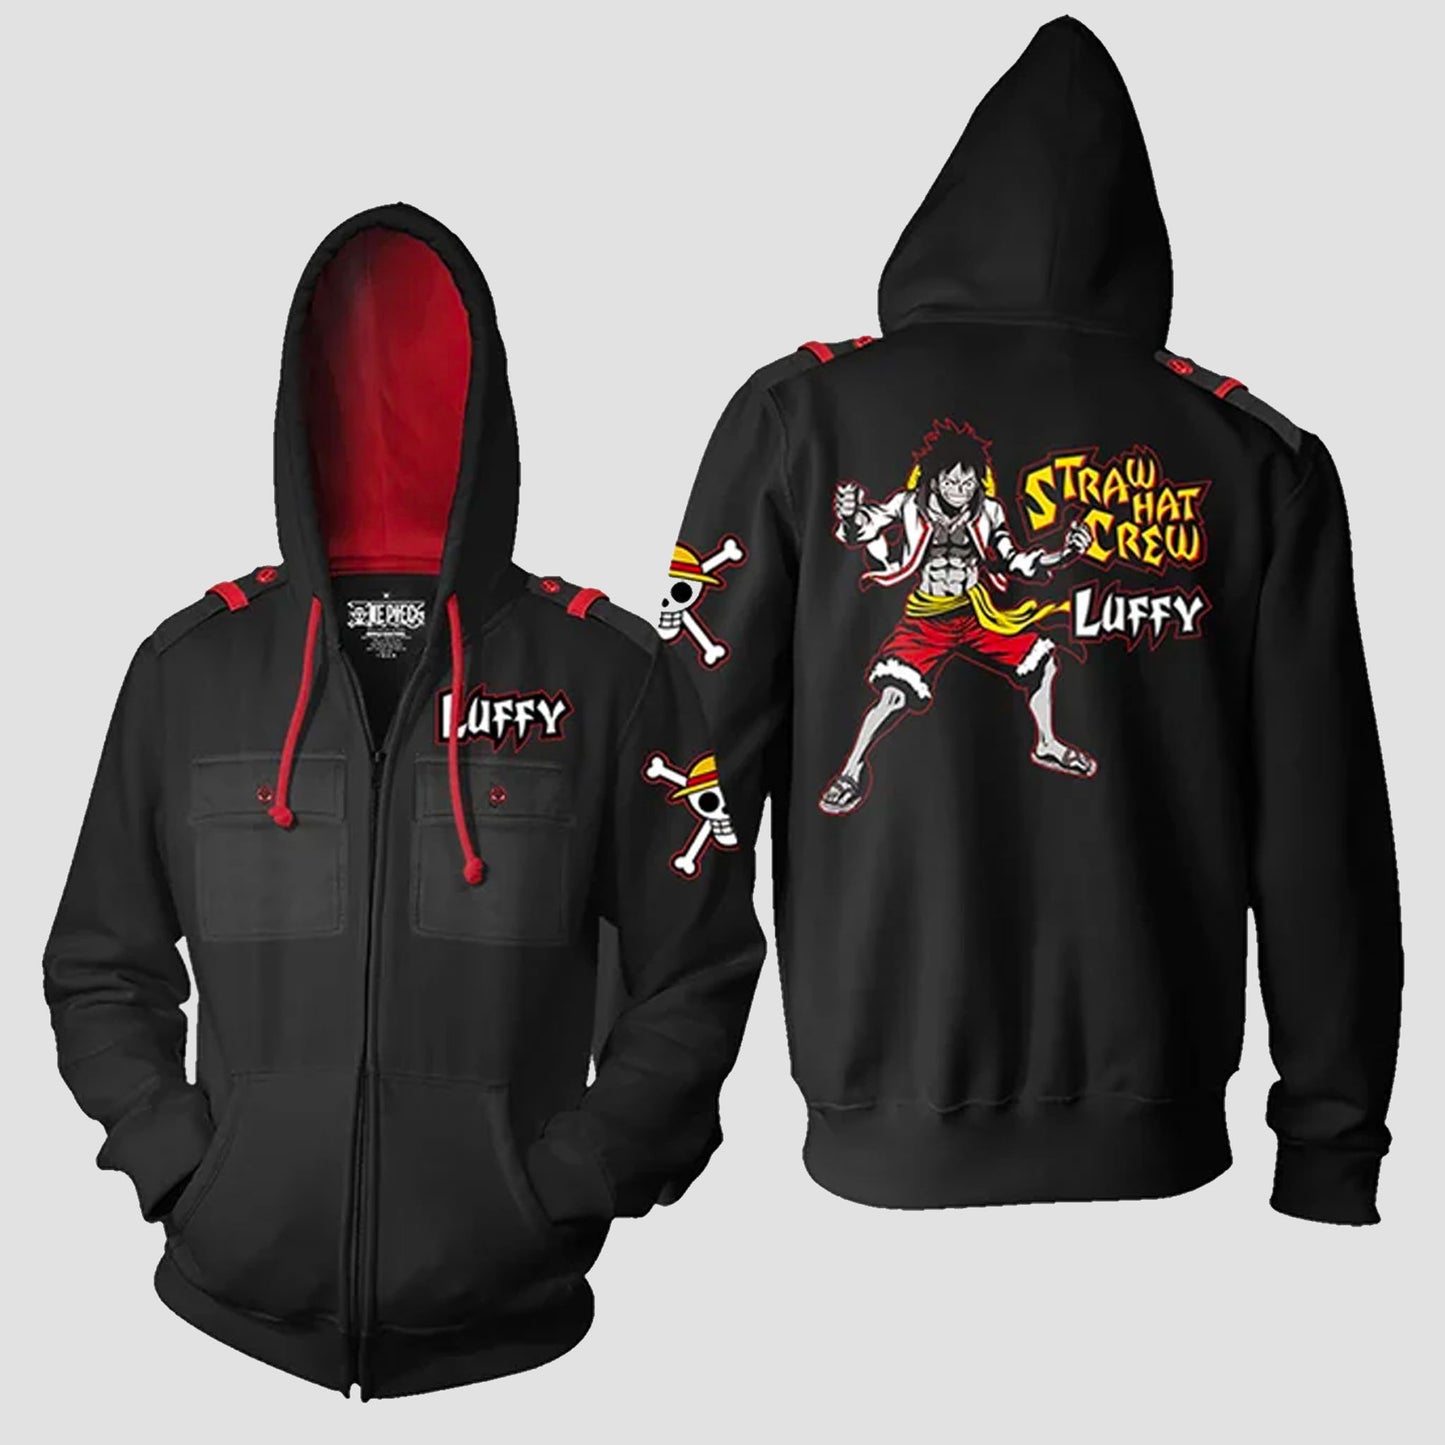 Monkey D. Luffy (One Piece) Military Style Premium Hoodie